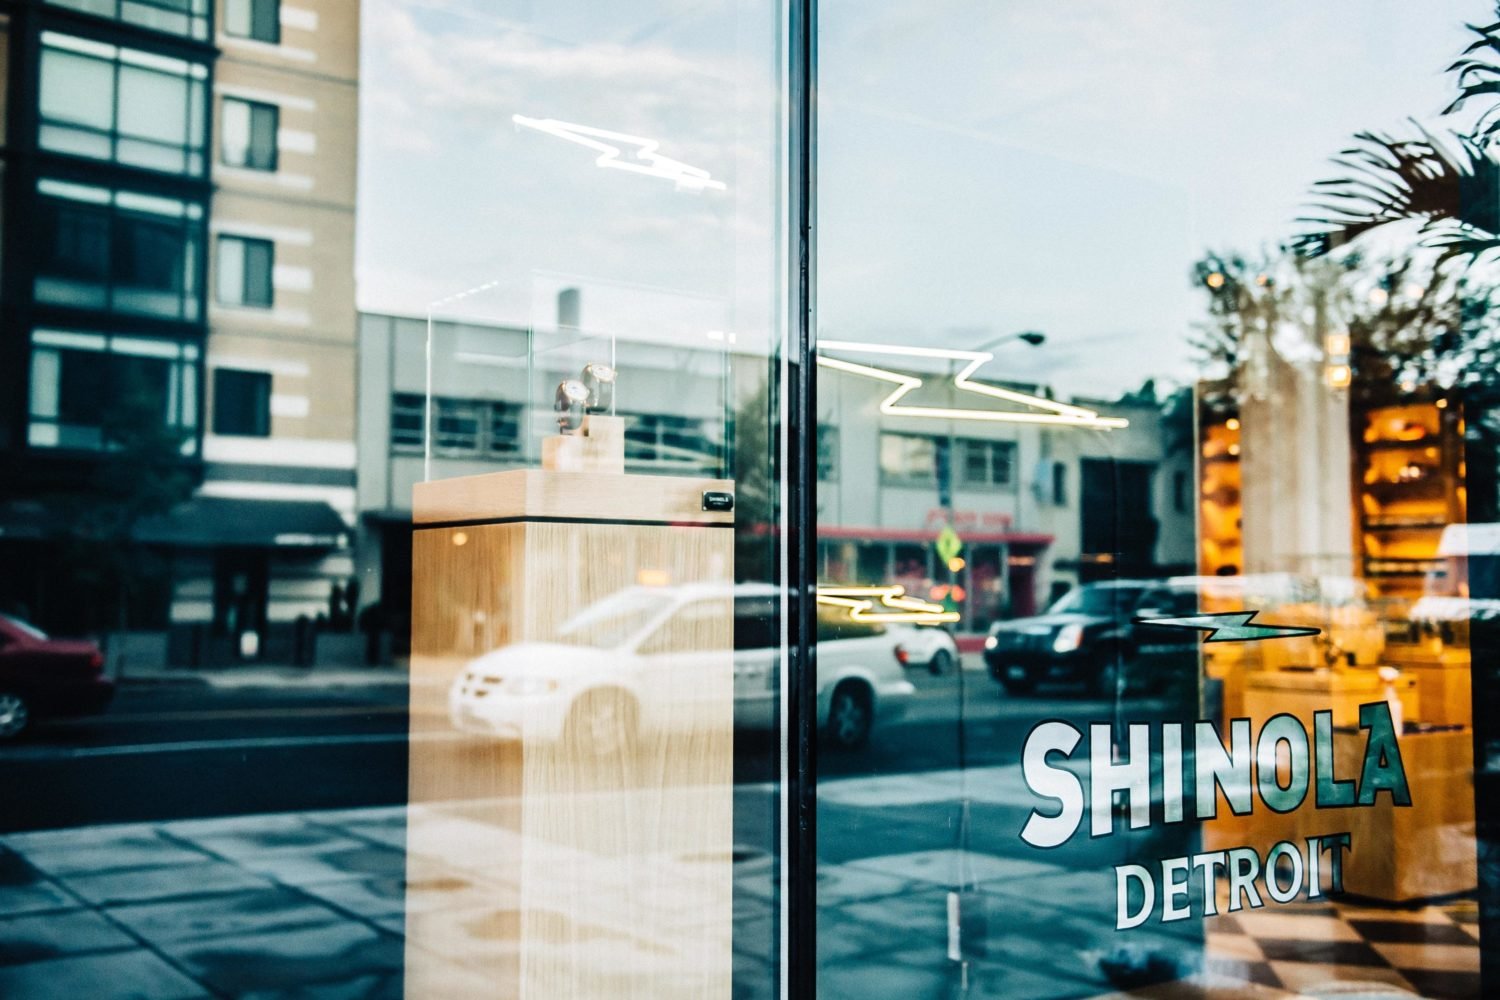 Shinola is coming to Tyson's Corner Center. Shinola is opening second store in DC.